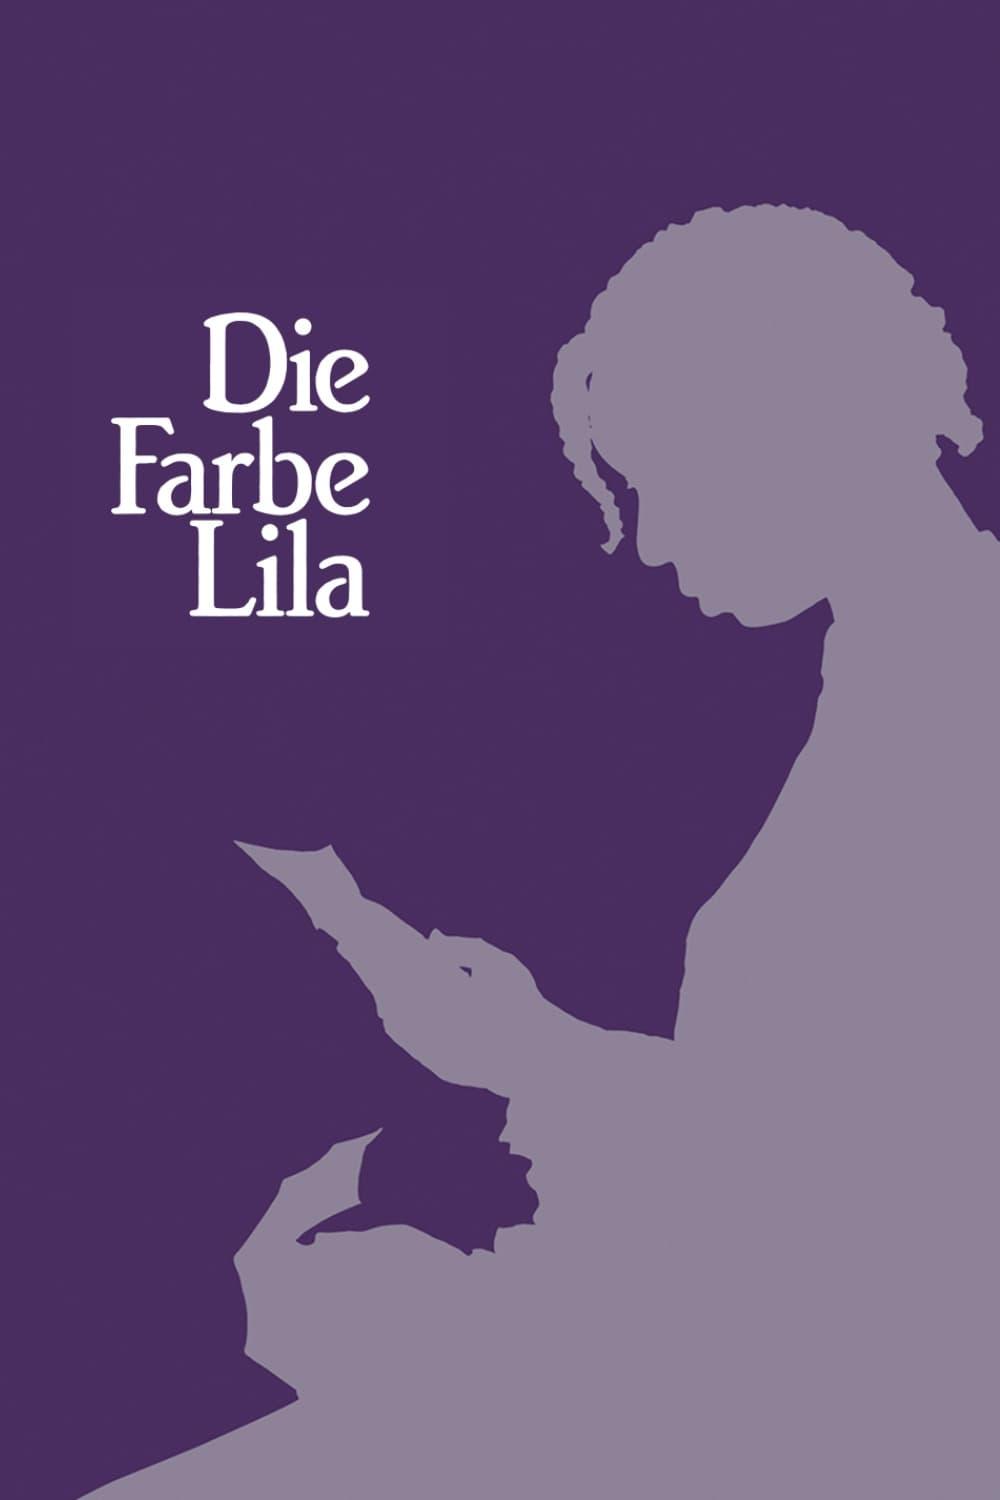 Die Farbe Lila poster